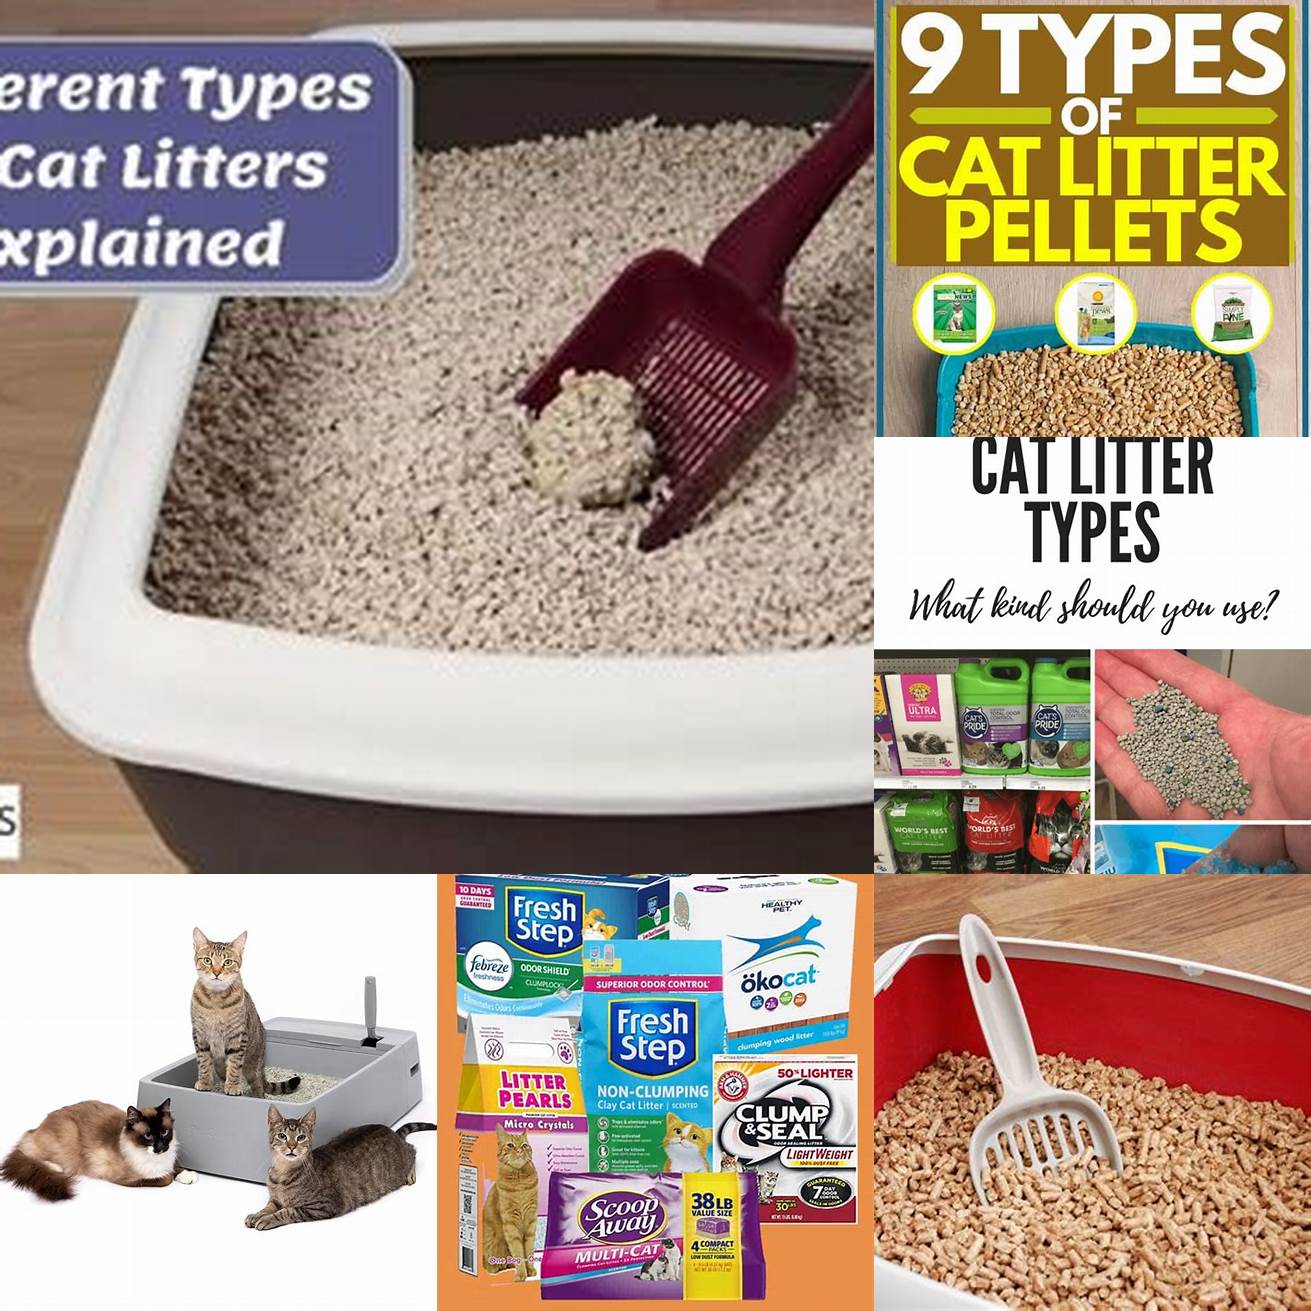 Experiment with different types of litter to find the one your cat likes best